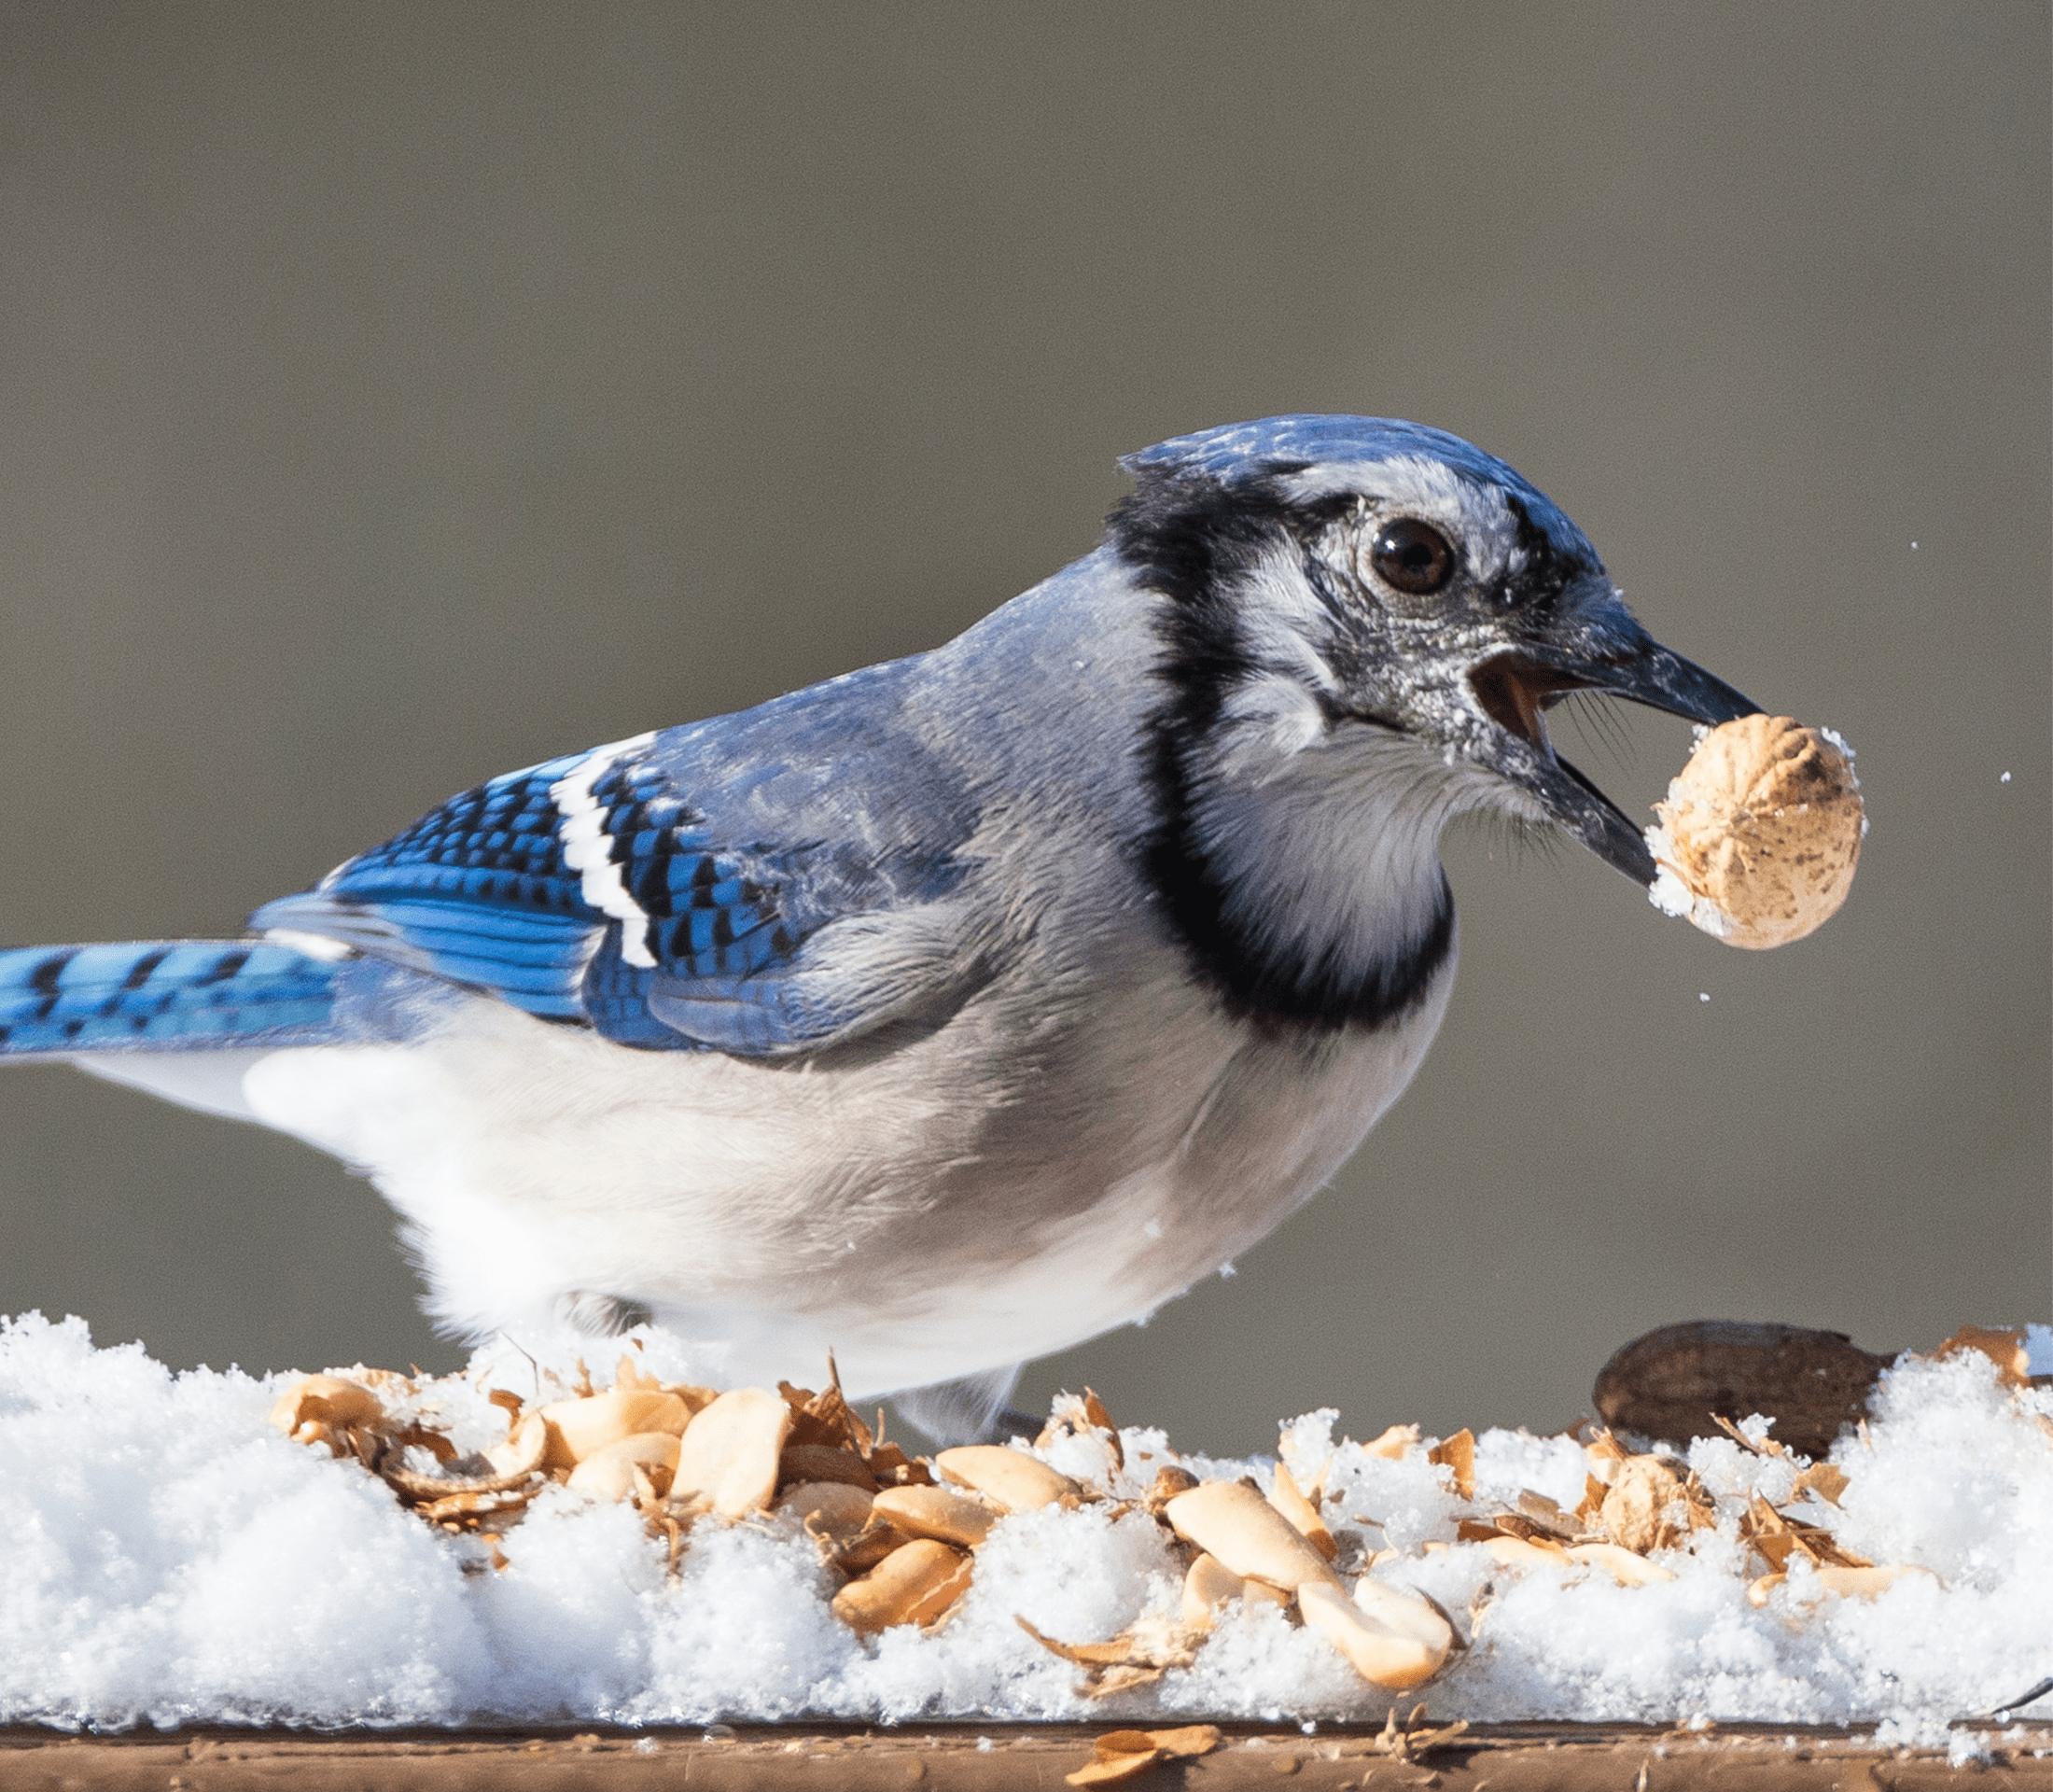 Blue bird pecking on food in the snow